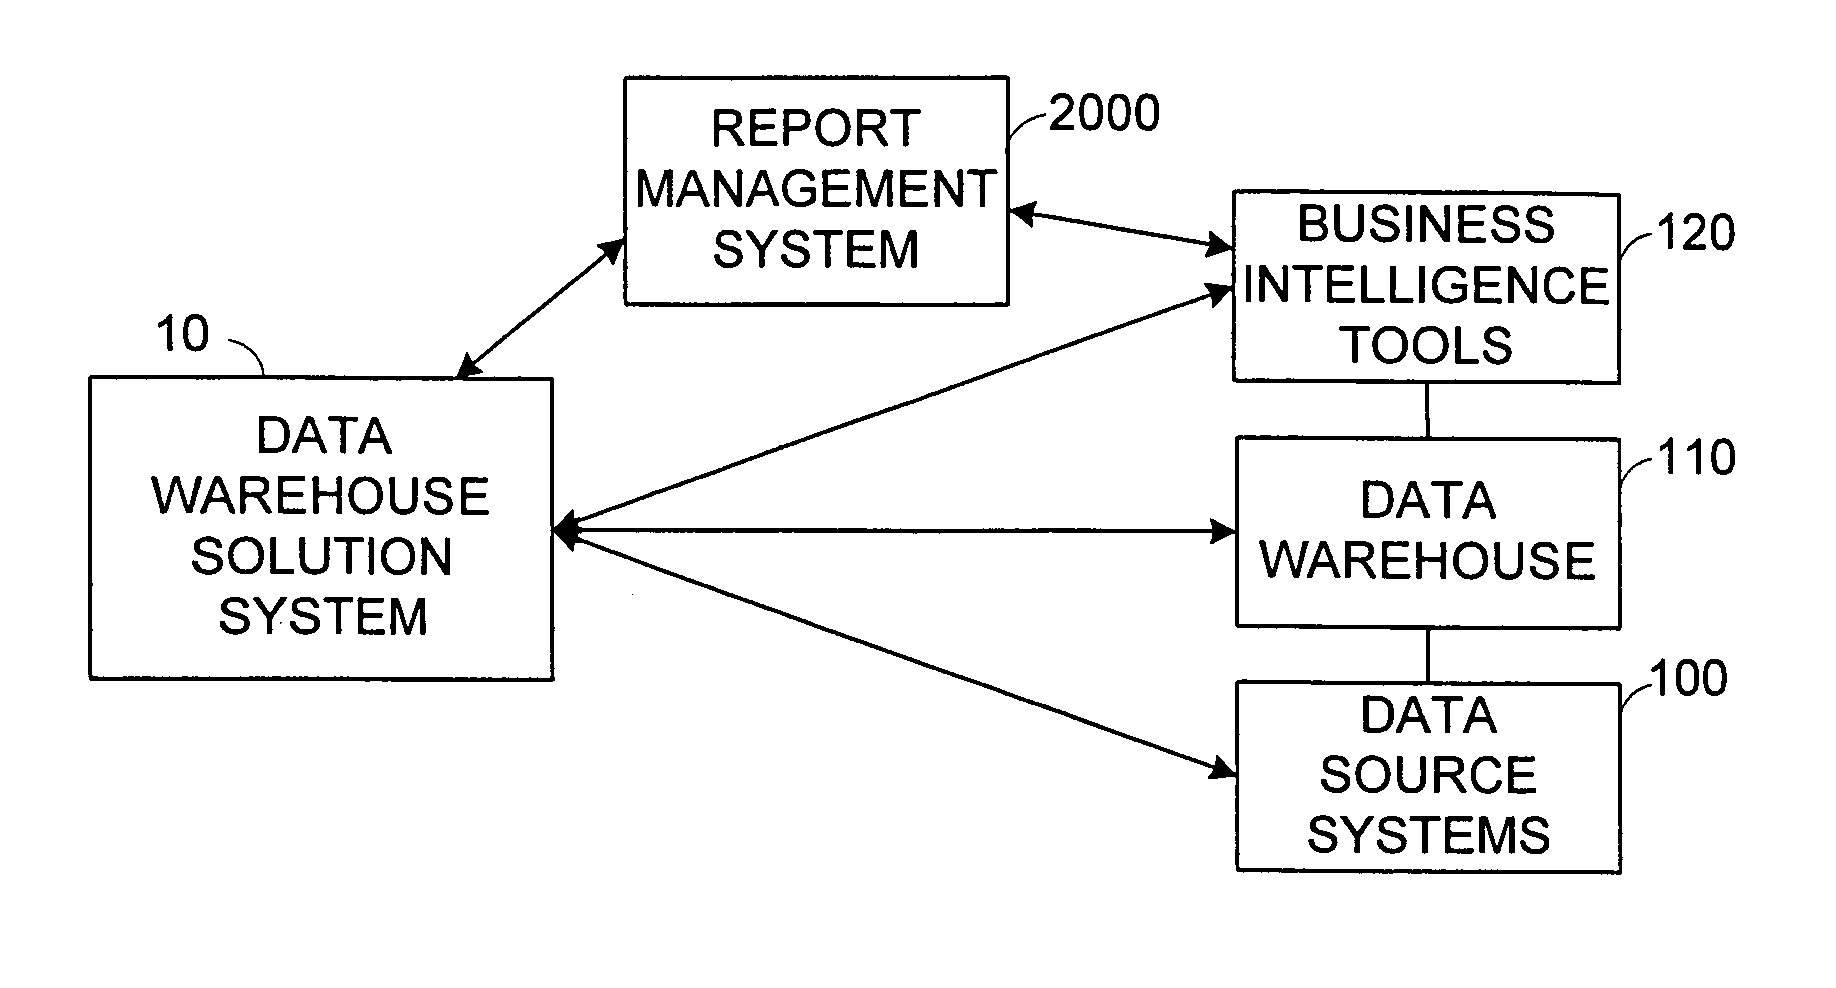 Report management system